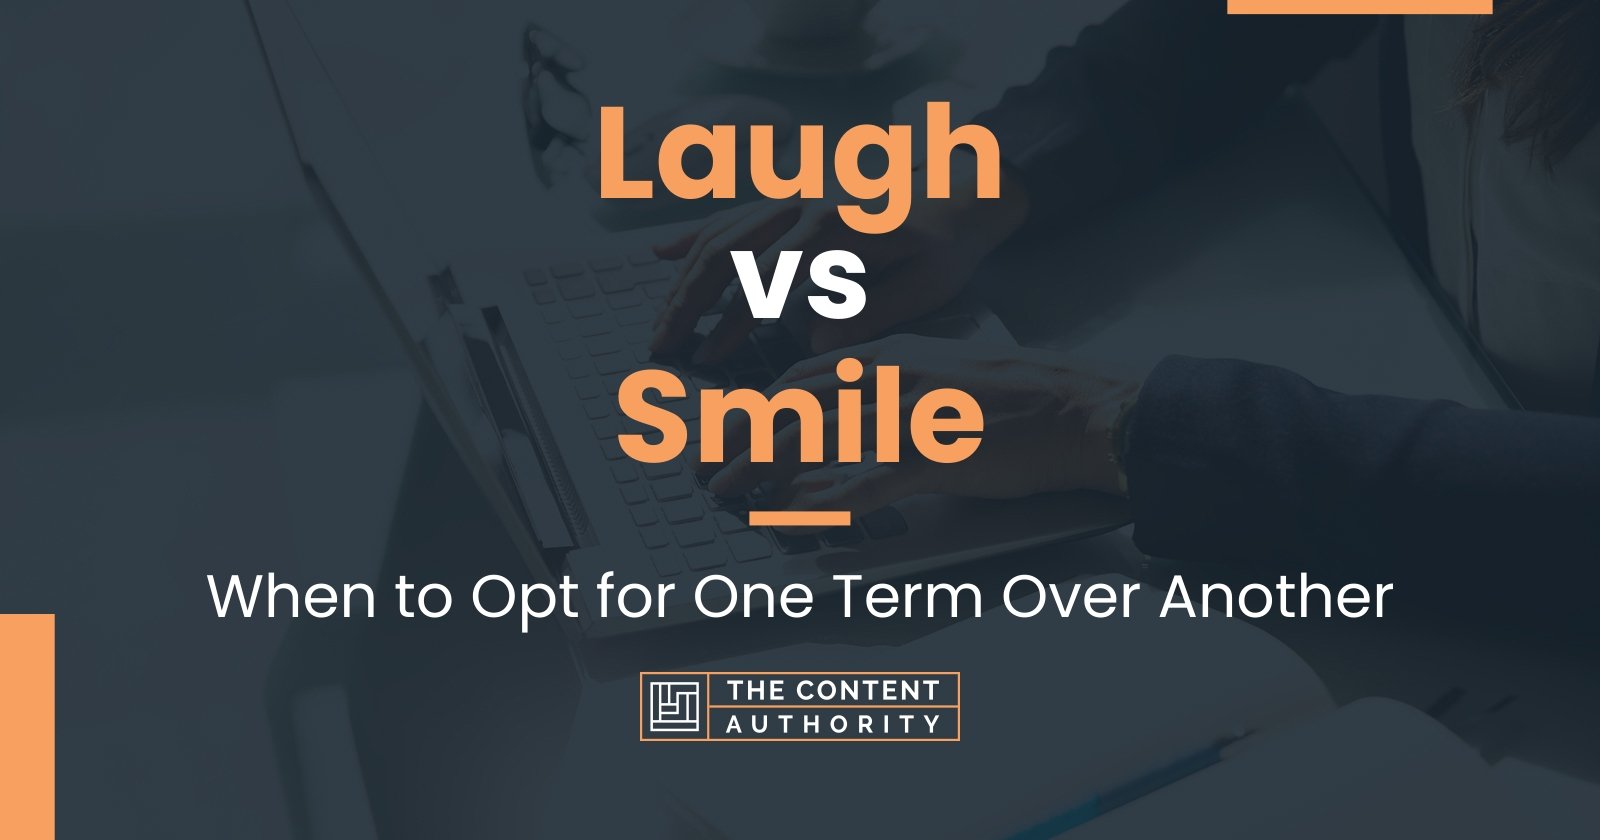 Laugh vs Smile: When to Opt for One Term Over Another